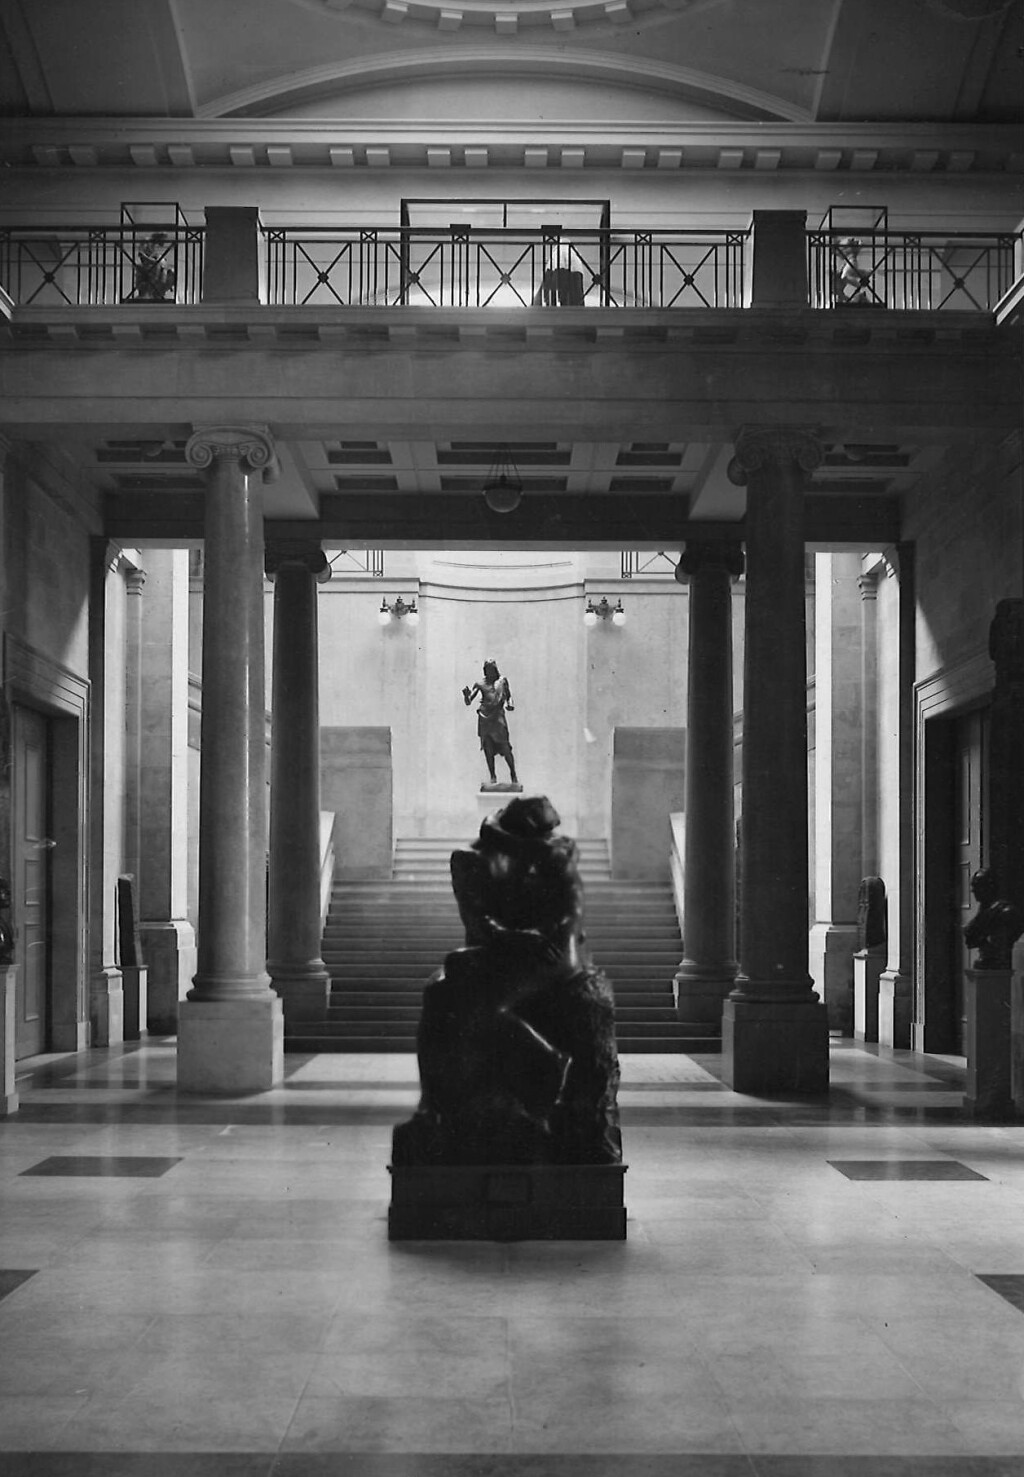 Photograph of the inside of the Main Hall with a grand staircase in the background, large columns supporting the ceiling and sculptures of figures dotted about